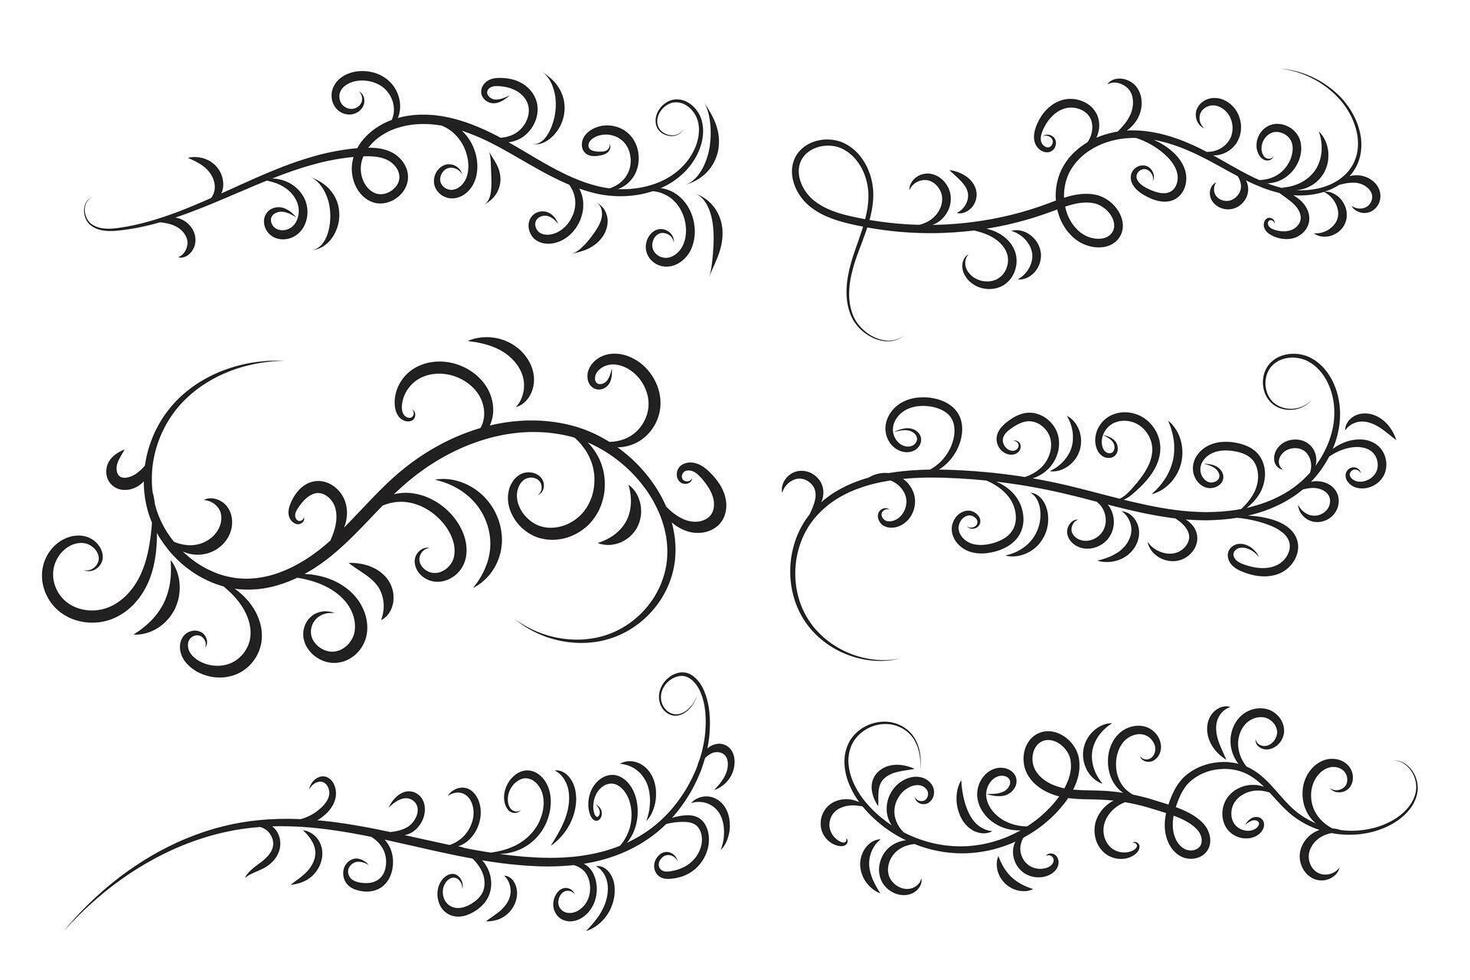 set of Vintage Filigree swirling, Calligraphy Doodle wind Decorative Elements, curly thin line Floral style swings swashes, Flourishes Swirls, flourish Swirl ornament vector, Elegant scroll design vector